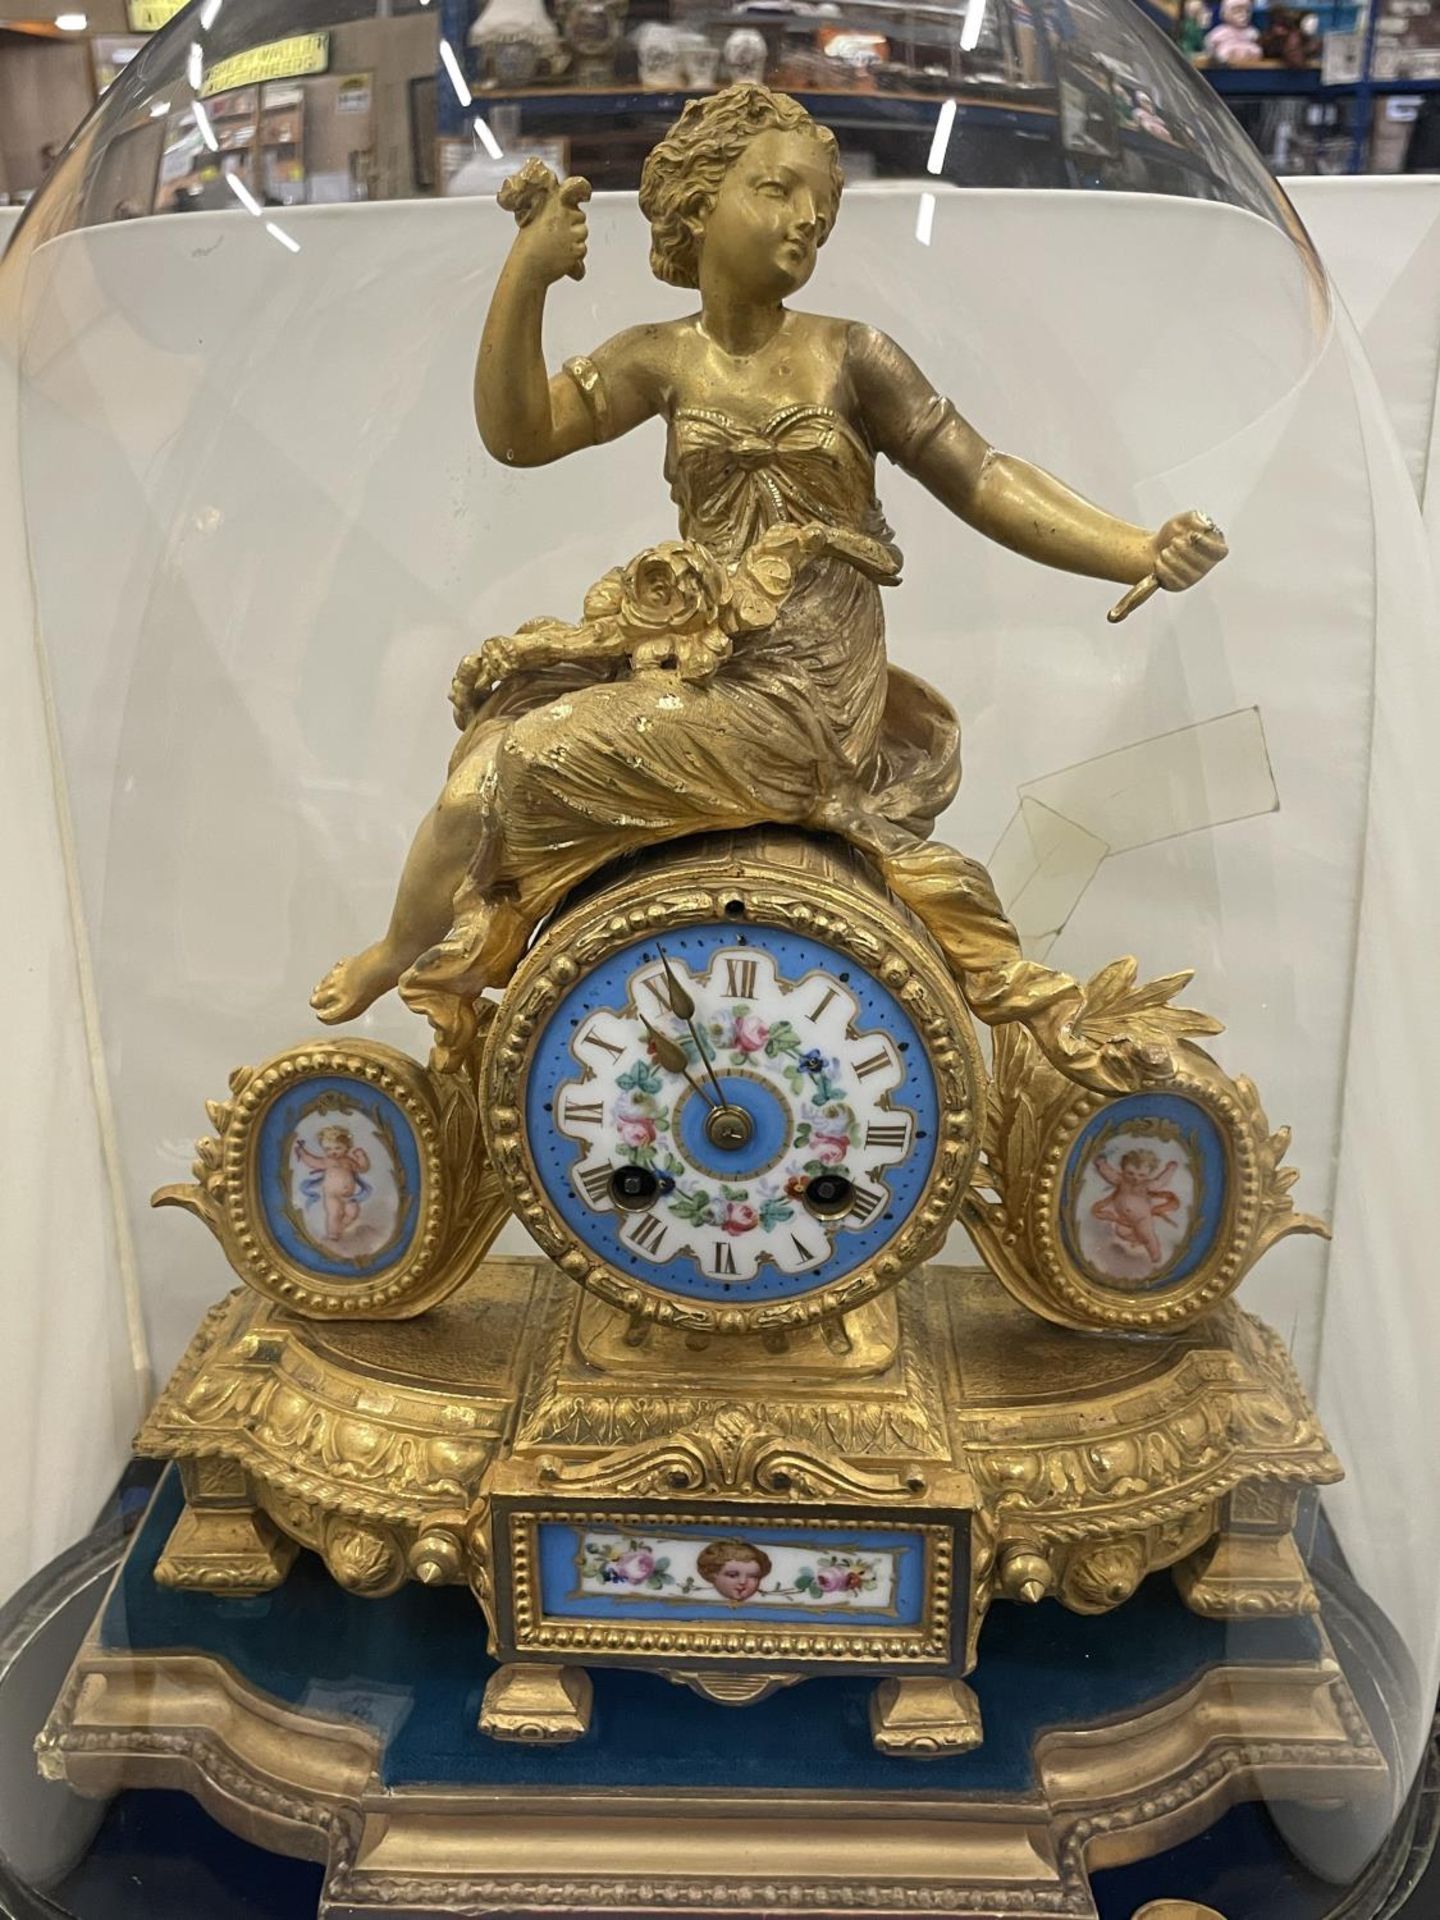 A VINTAGE FRENCH ORMOLU CLOCK WITH DECORATIVE ENAMEL FACE AND PANELS IN A GLASS DOME (A/F) - Image 4 of 10